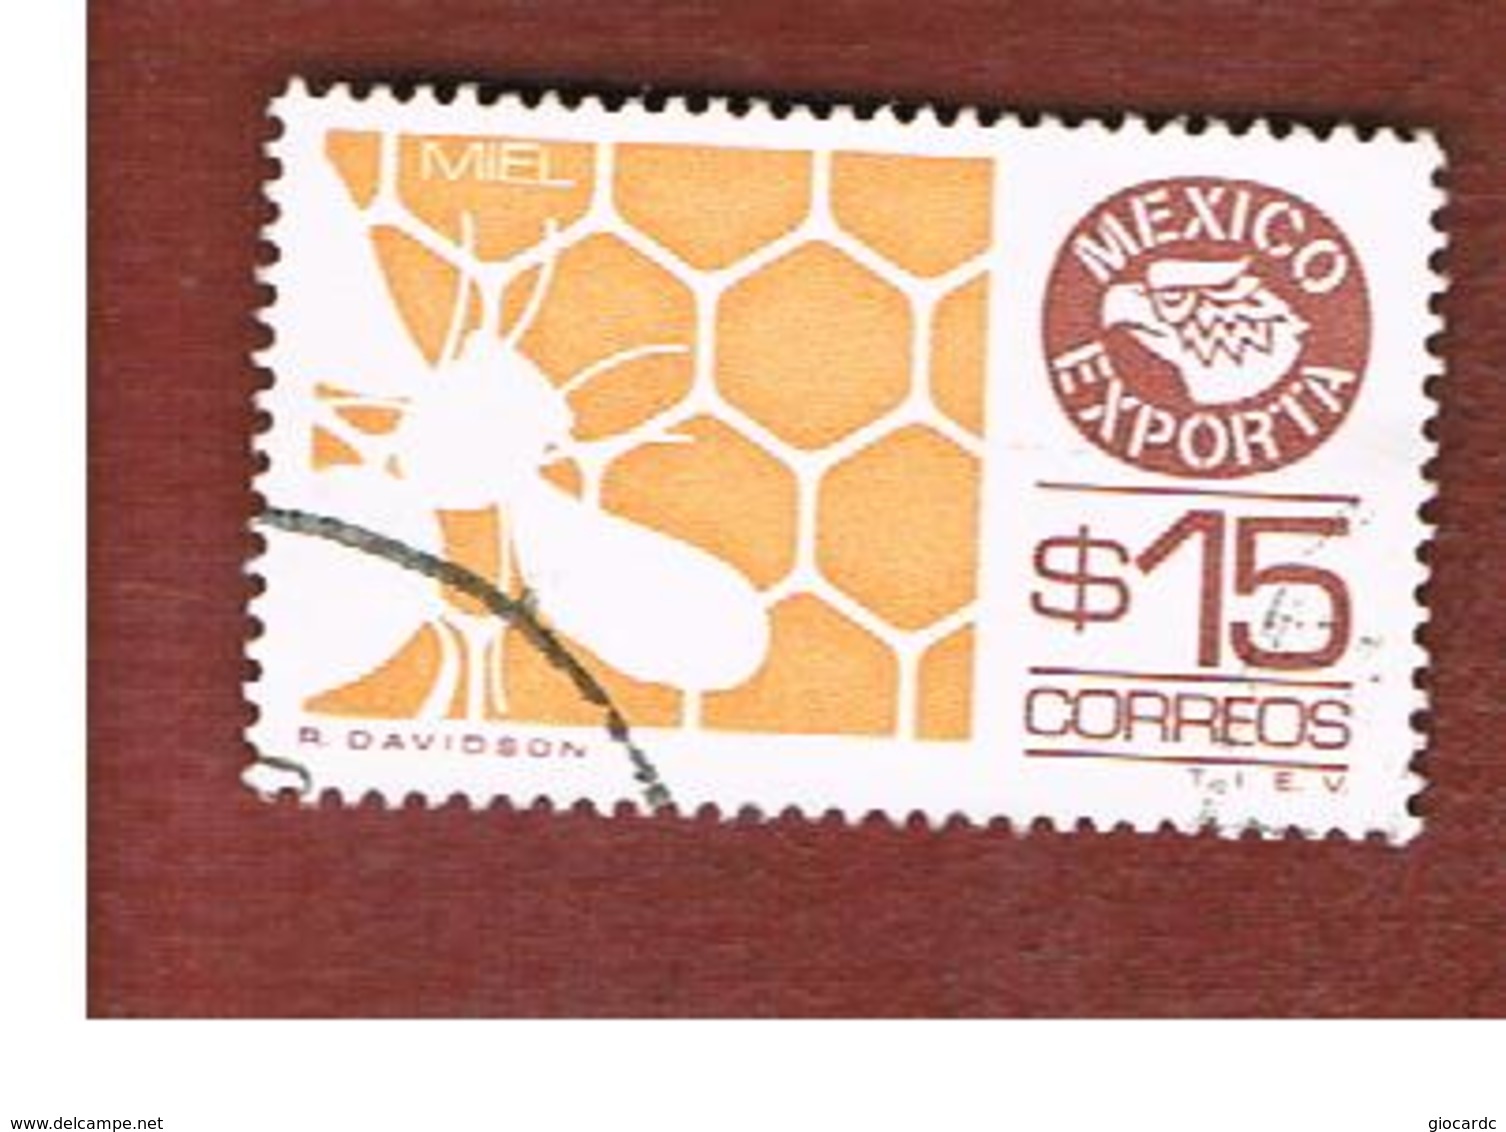 MESSICO (MEXICO) -  SG 1360ad   - 1984 MEXICAN EXPORTS: HONEY            -  USED° - Messico